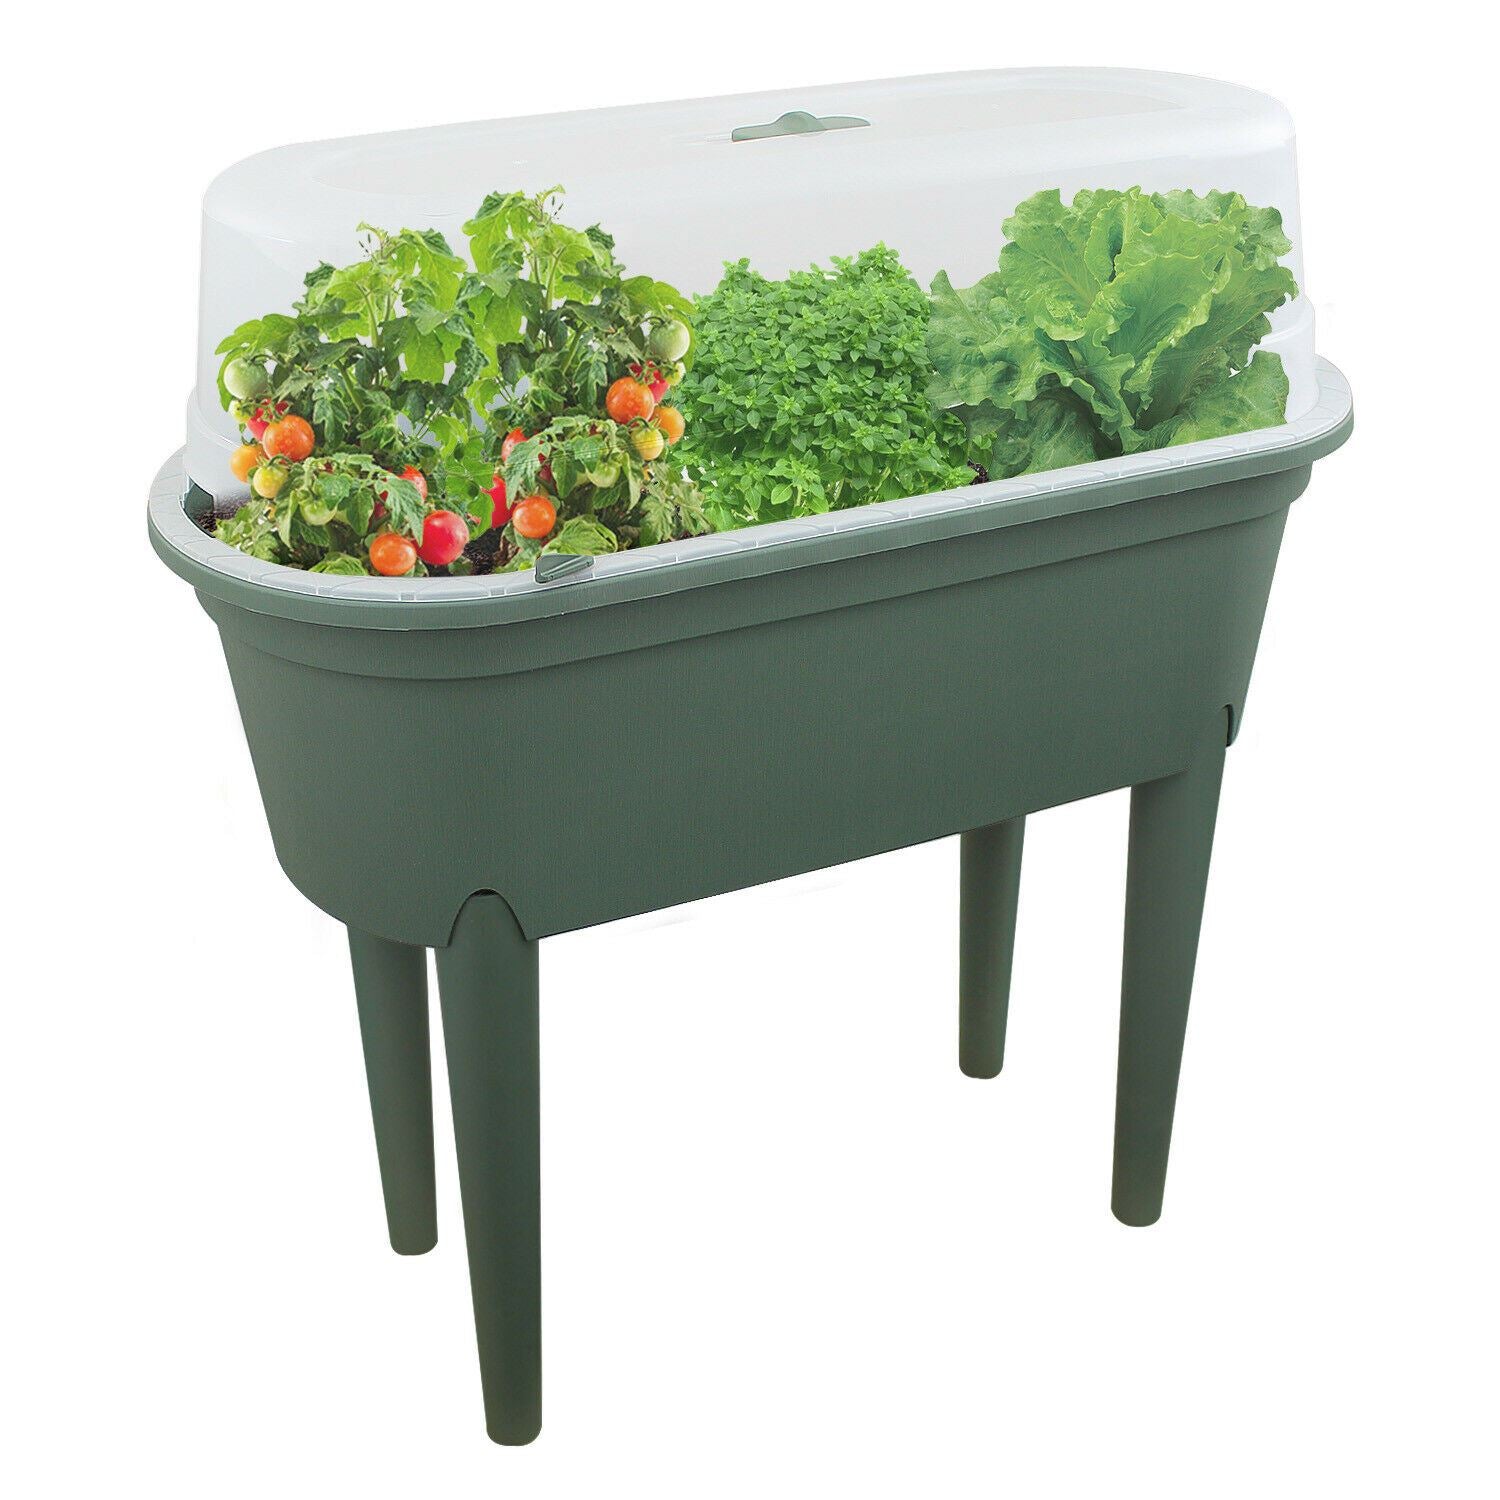 Green Colour Greenhouse Table With Lid by Geezy - UKBuyZone